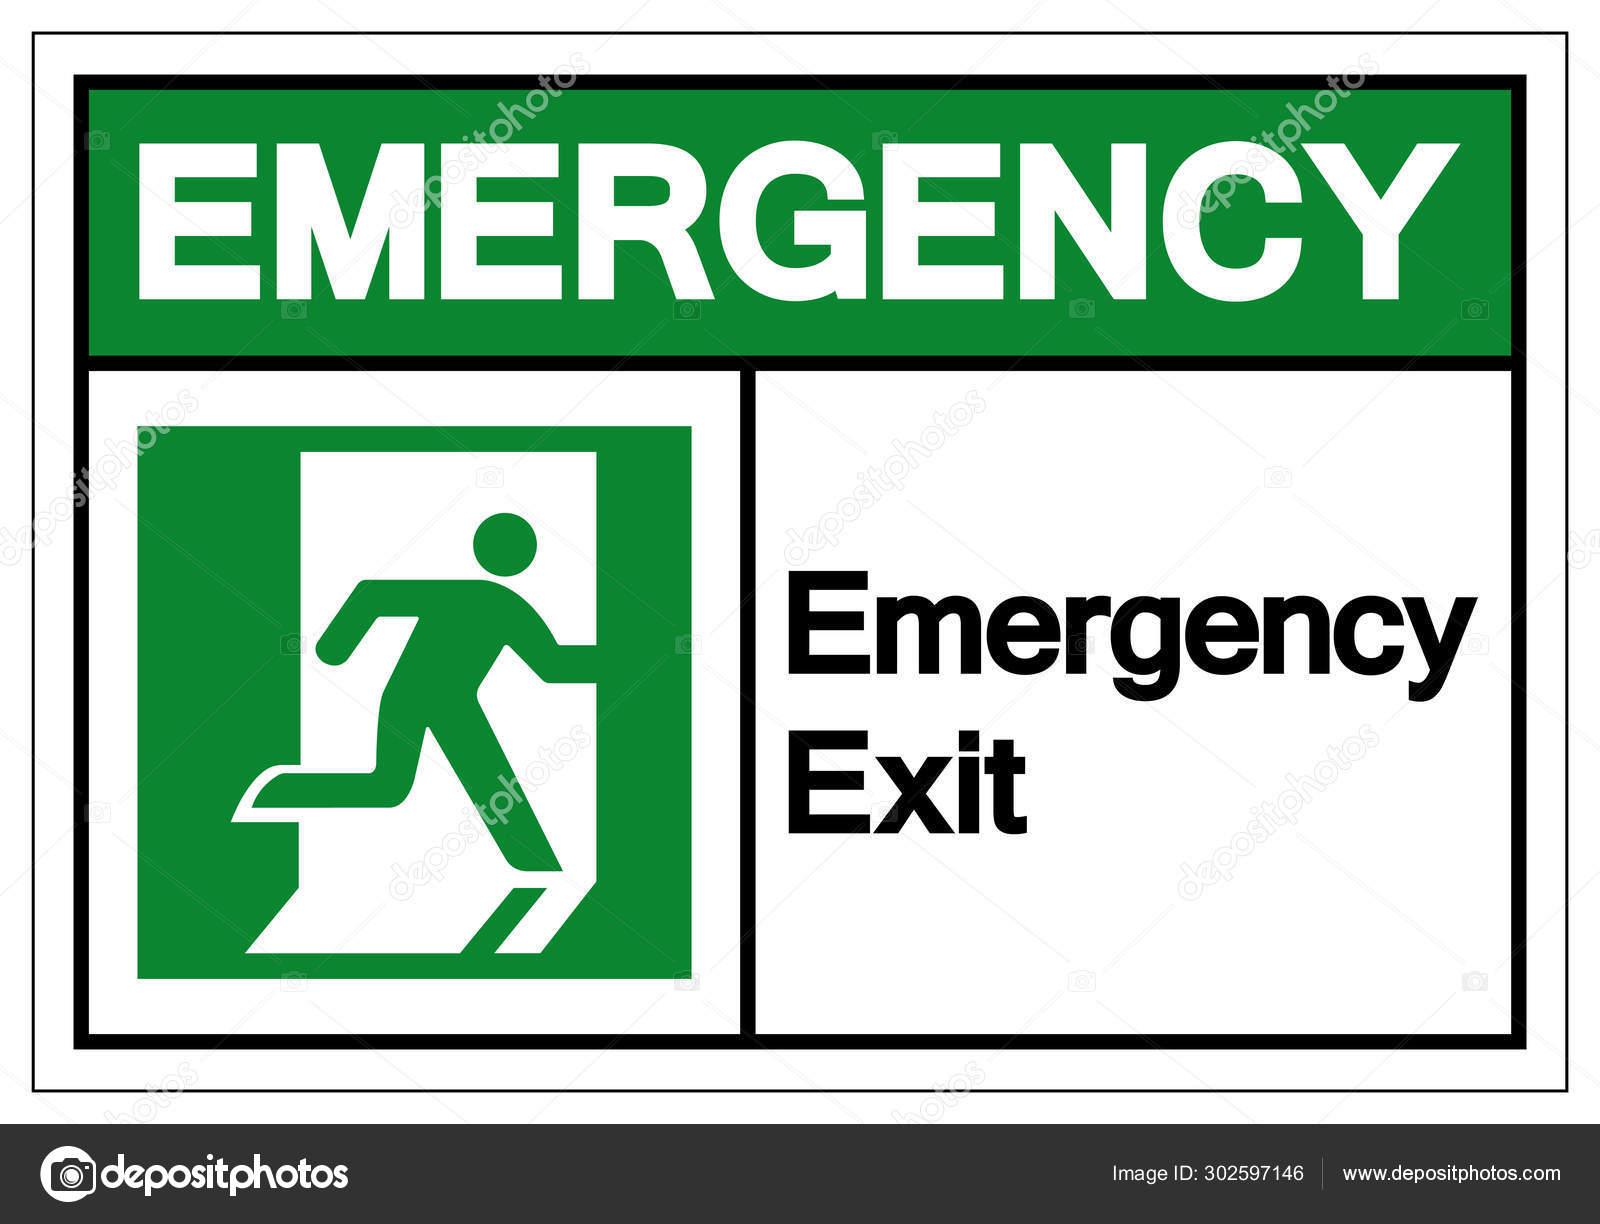 Emergency Exit Symbol Sign Vector Illustration Isolate On White Background Label Eps10 Vector Image By C Technicsorn Vector Stock